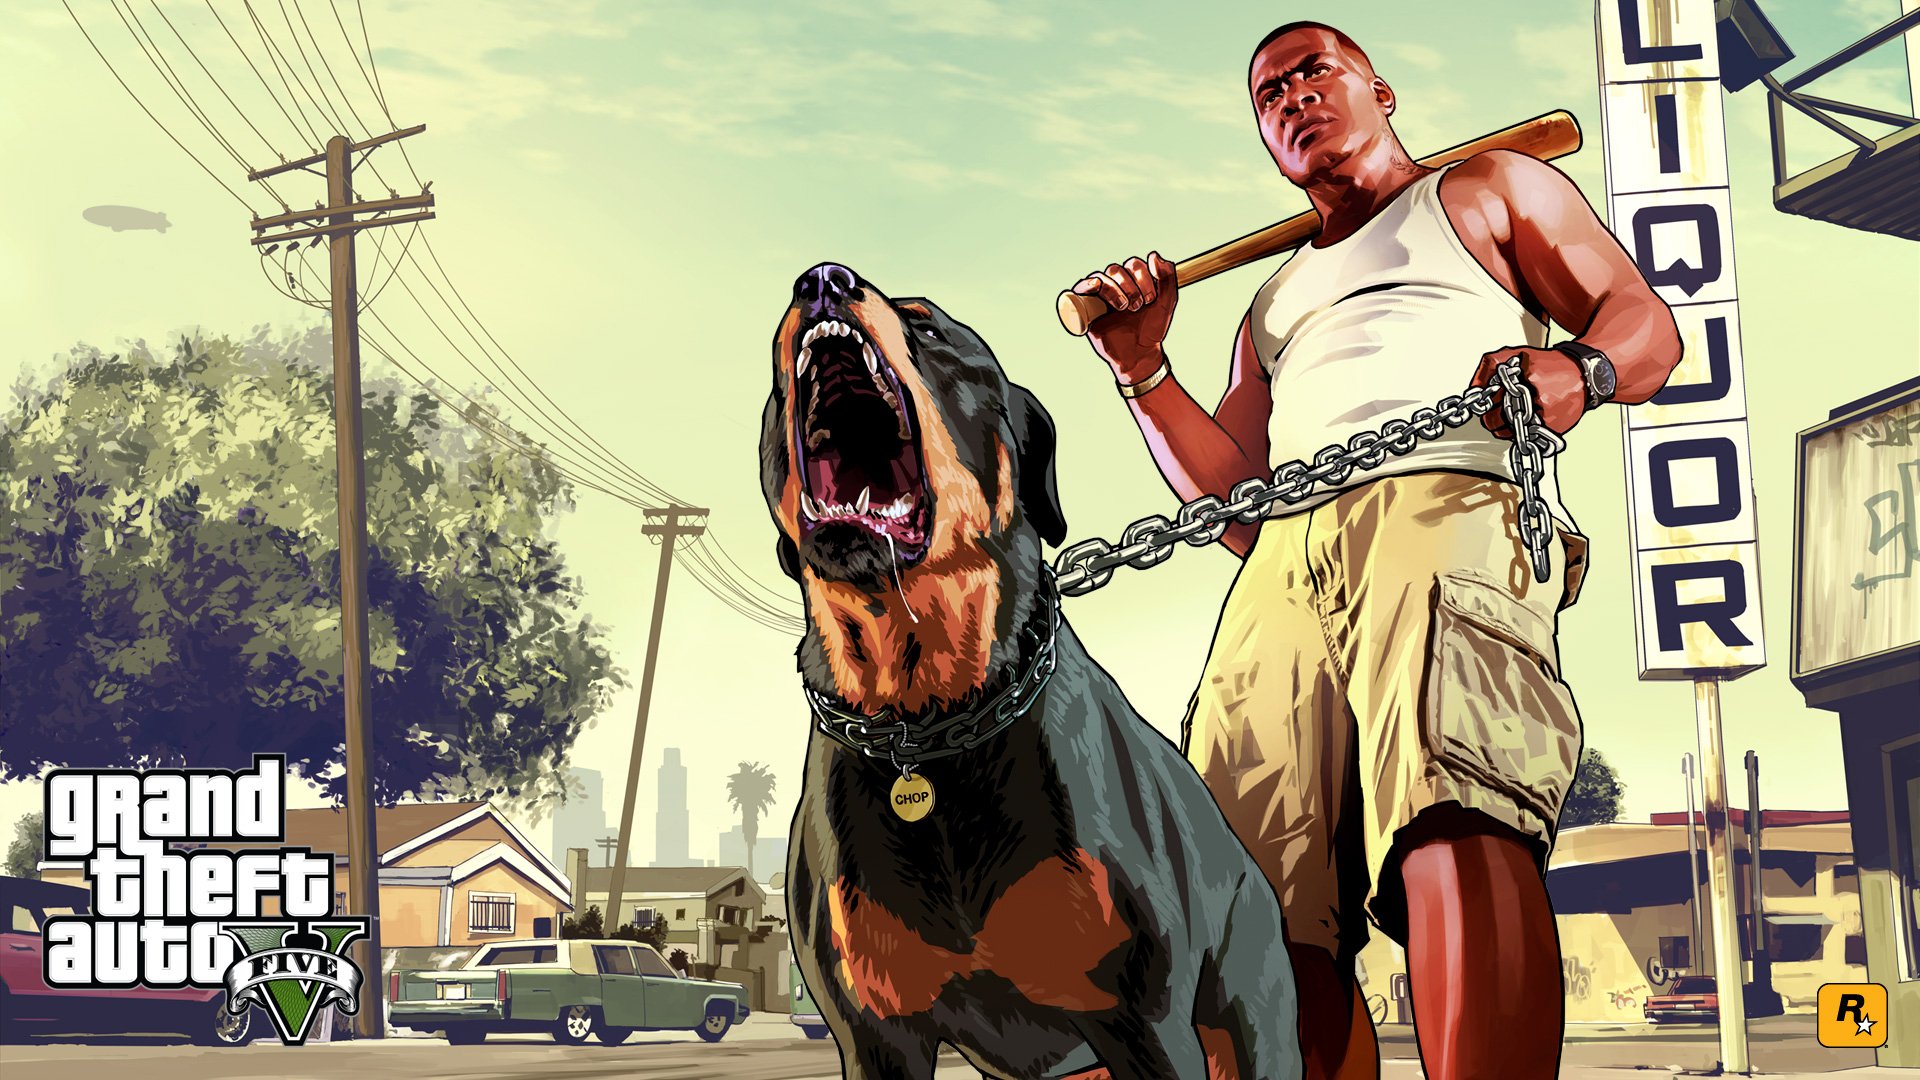 GTA 5 Wallpapers in HD Page 6 1920x1080